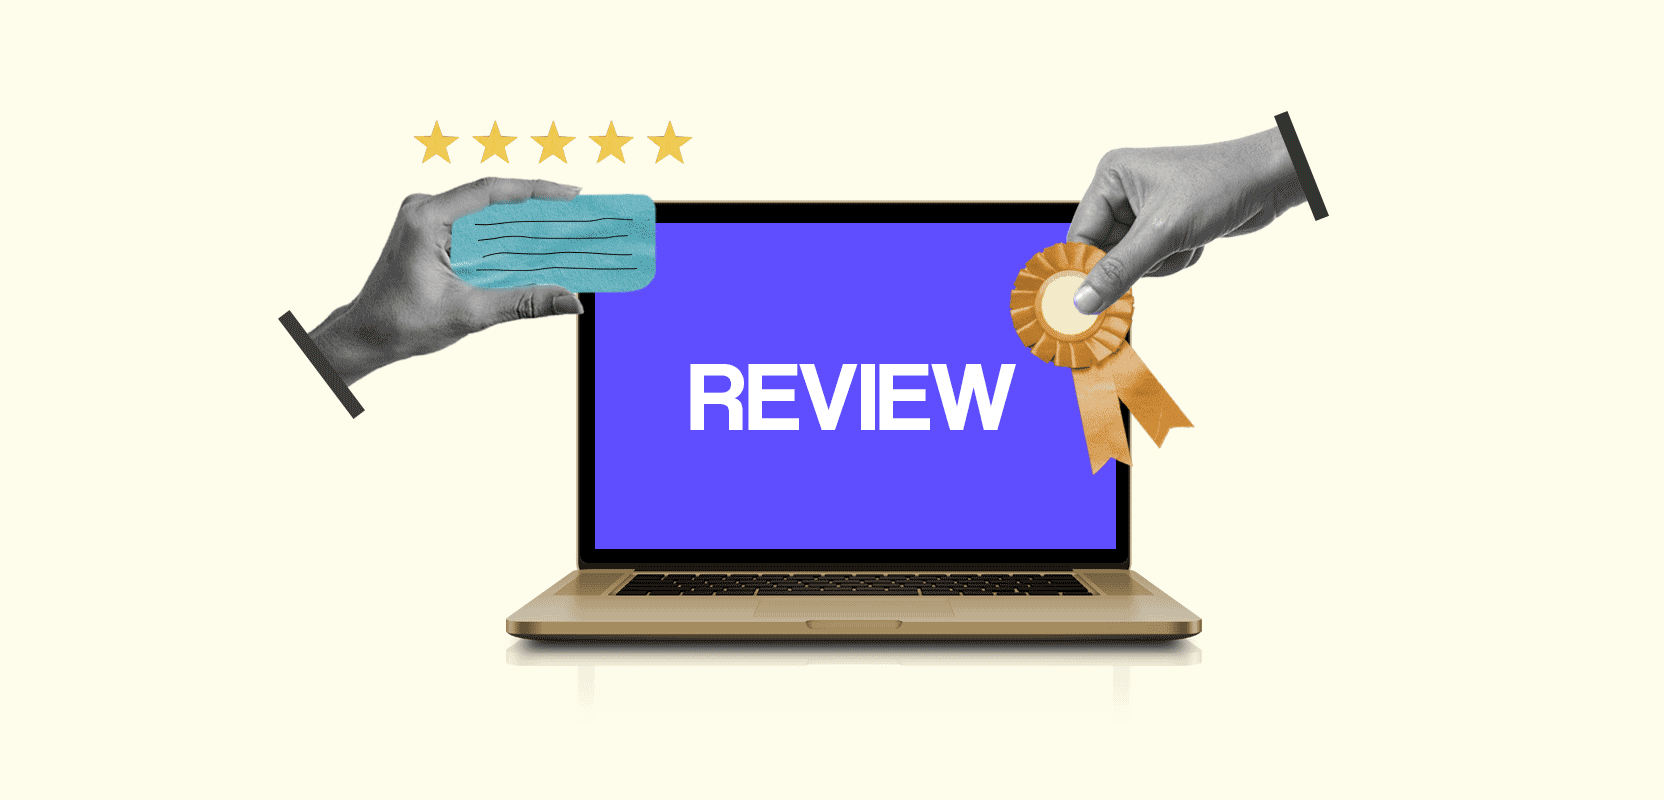 Laptop screen showing the word Review with five stars and a ribbon around it